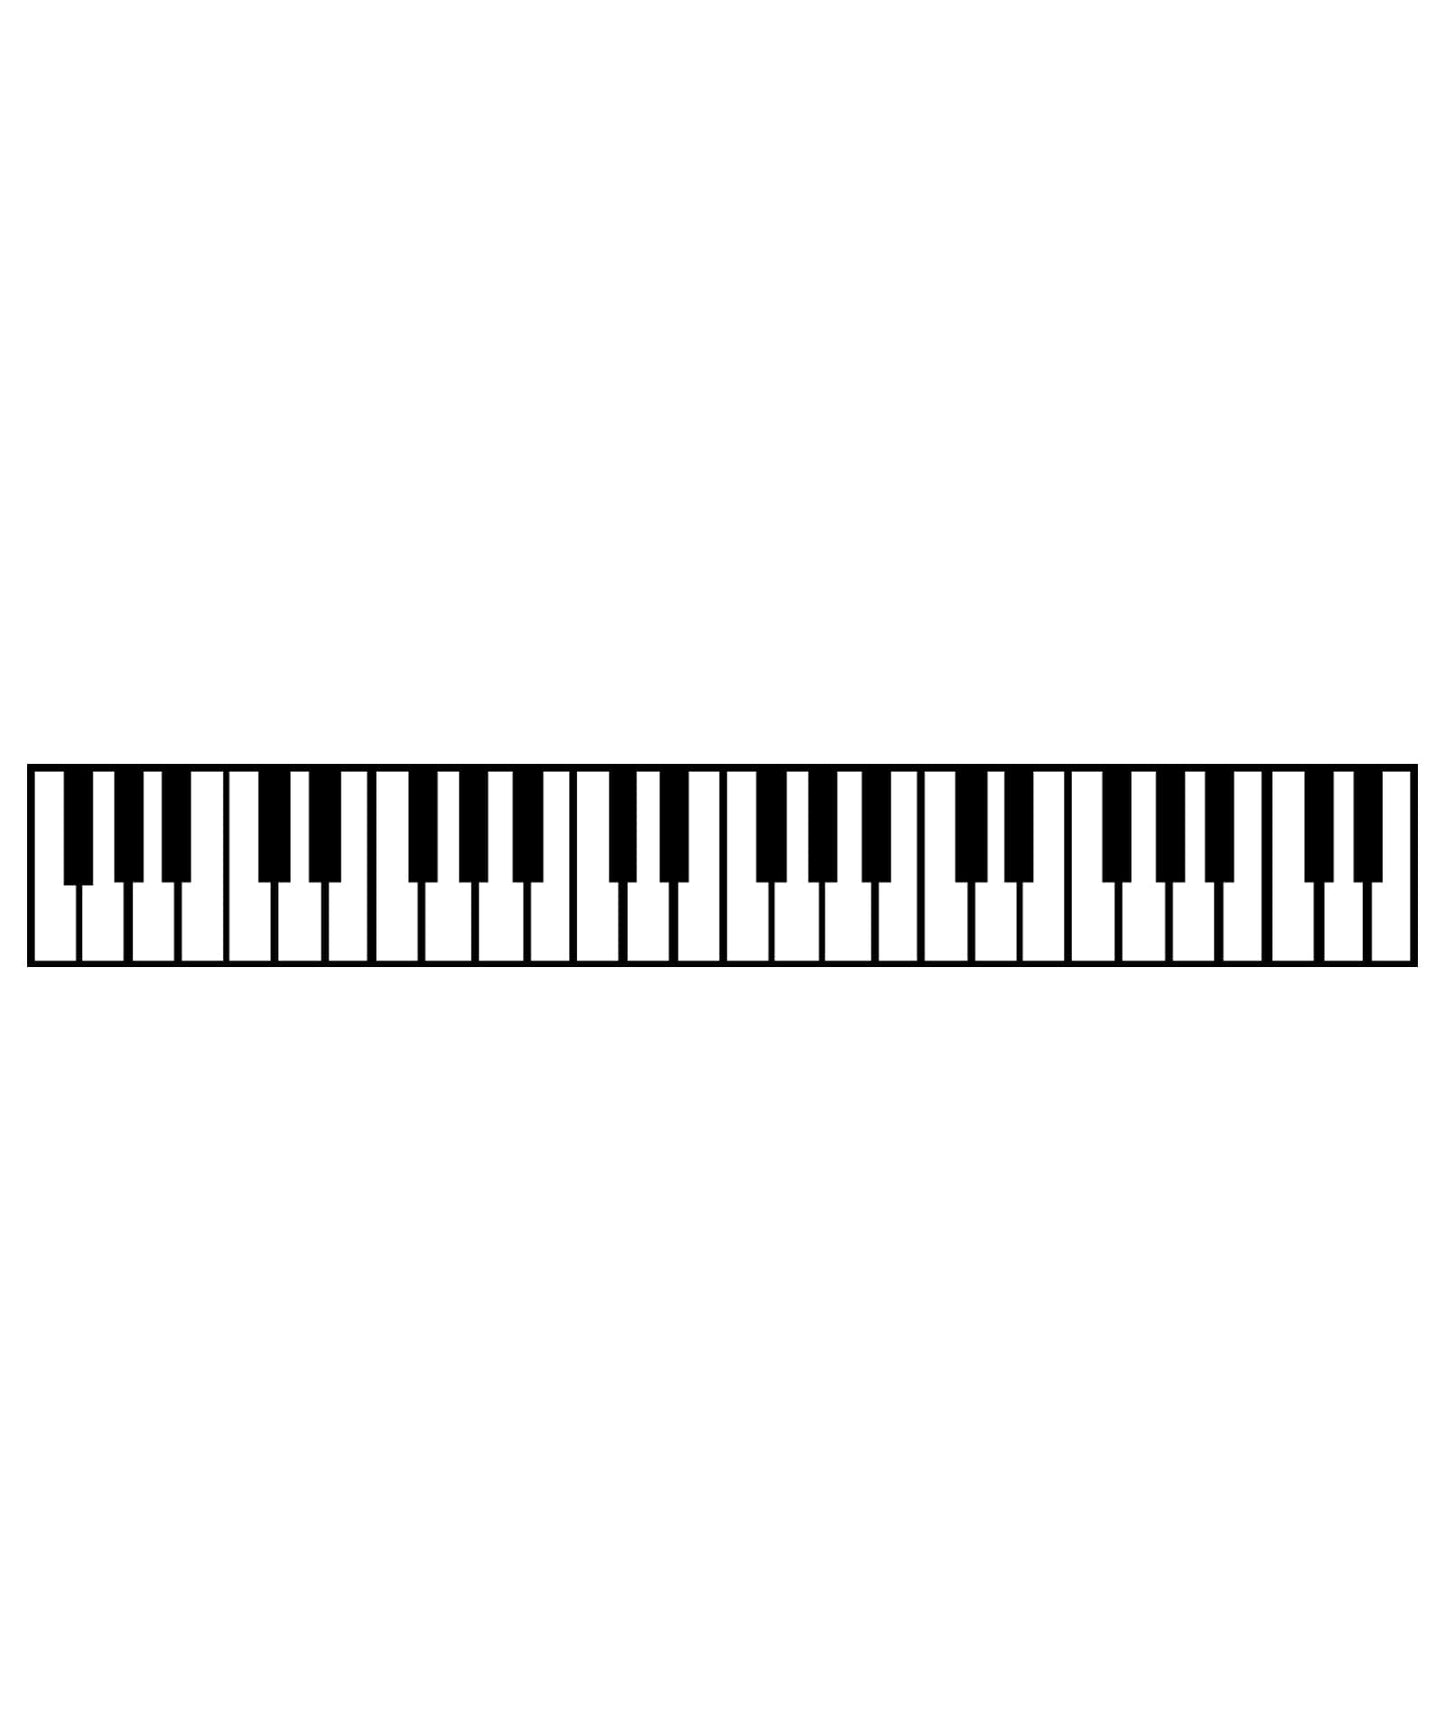 Piano Keys Die-Cut Wall Decal Sticker. Musical Instrument Decor. #OS_MB887